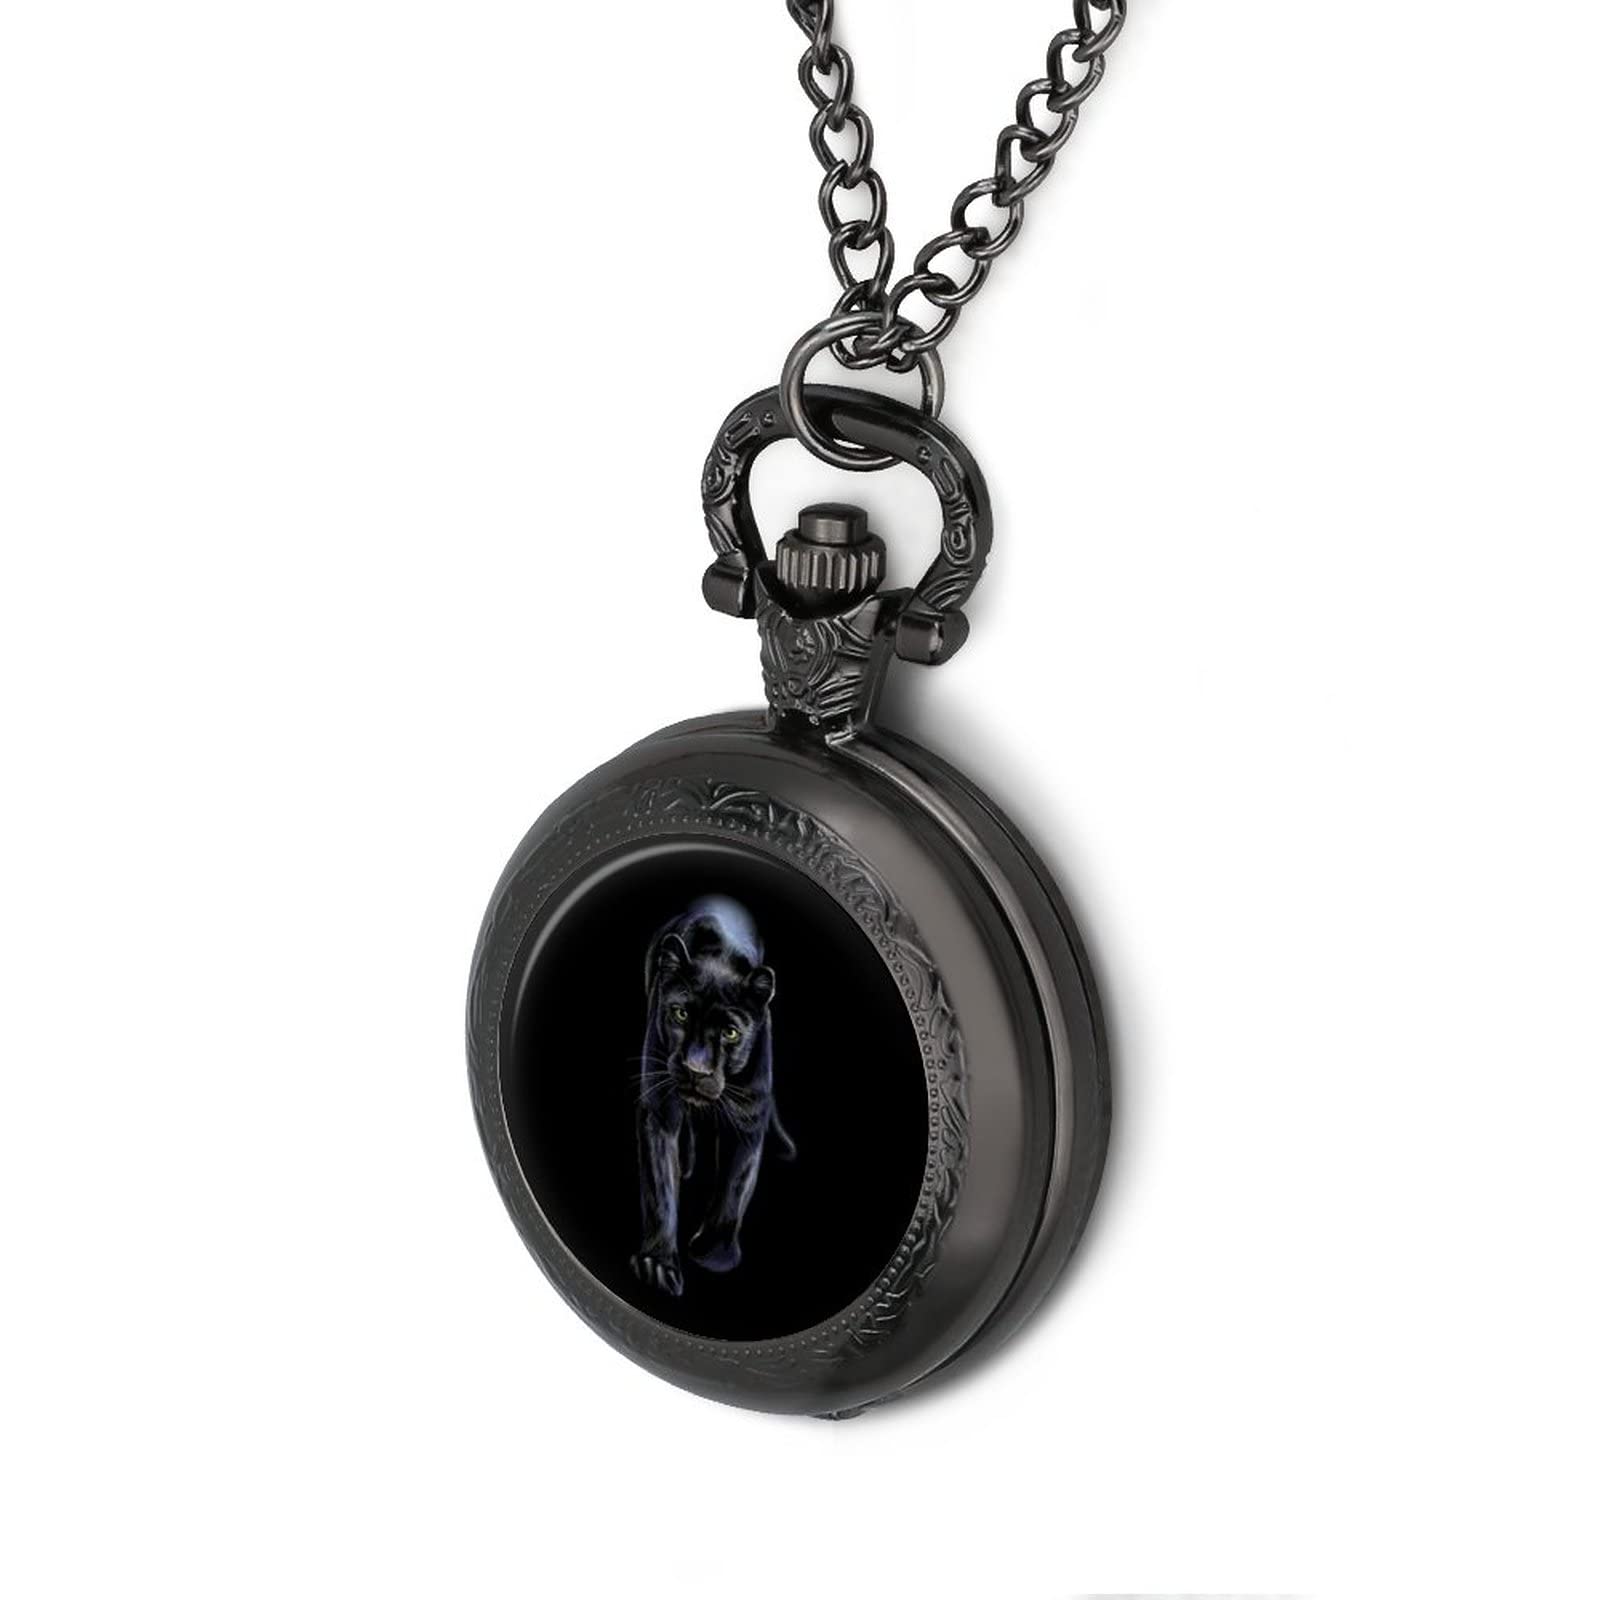 Color Portrait of A Walking Panther Quartz Pocket Watch With Chains Retro Necklace For Birthday Valentine's Day Wedding Gift